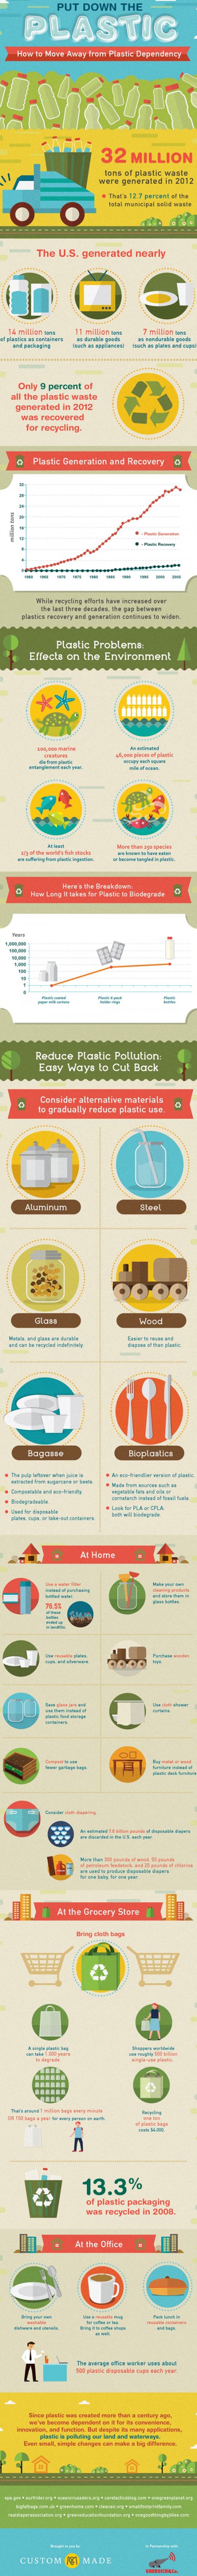 plastic_infographic_scale_size4